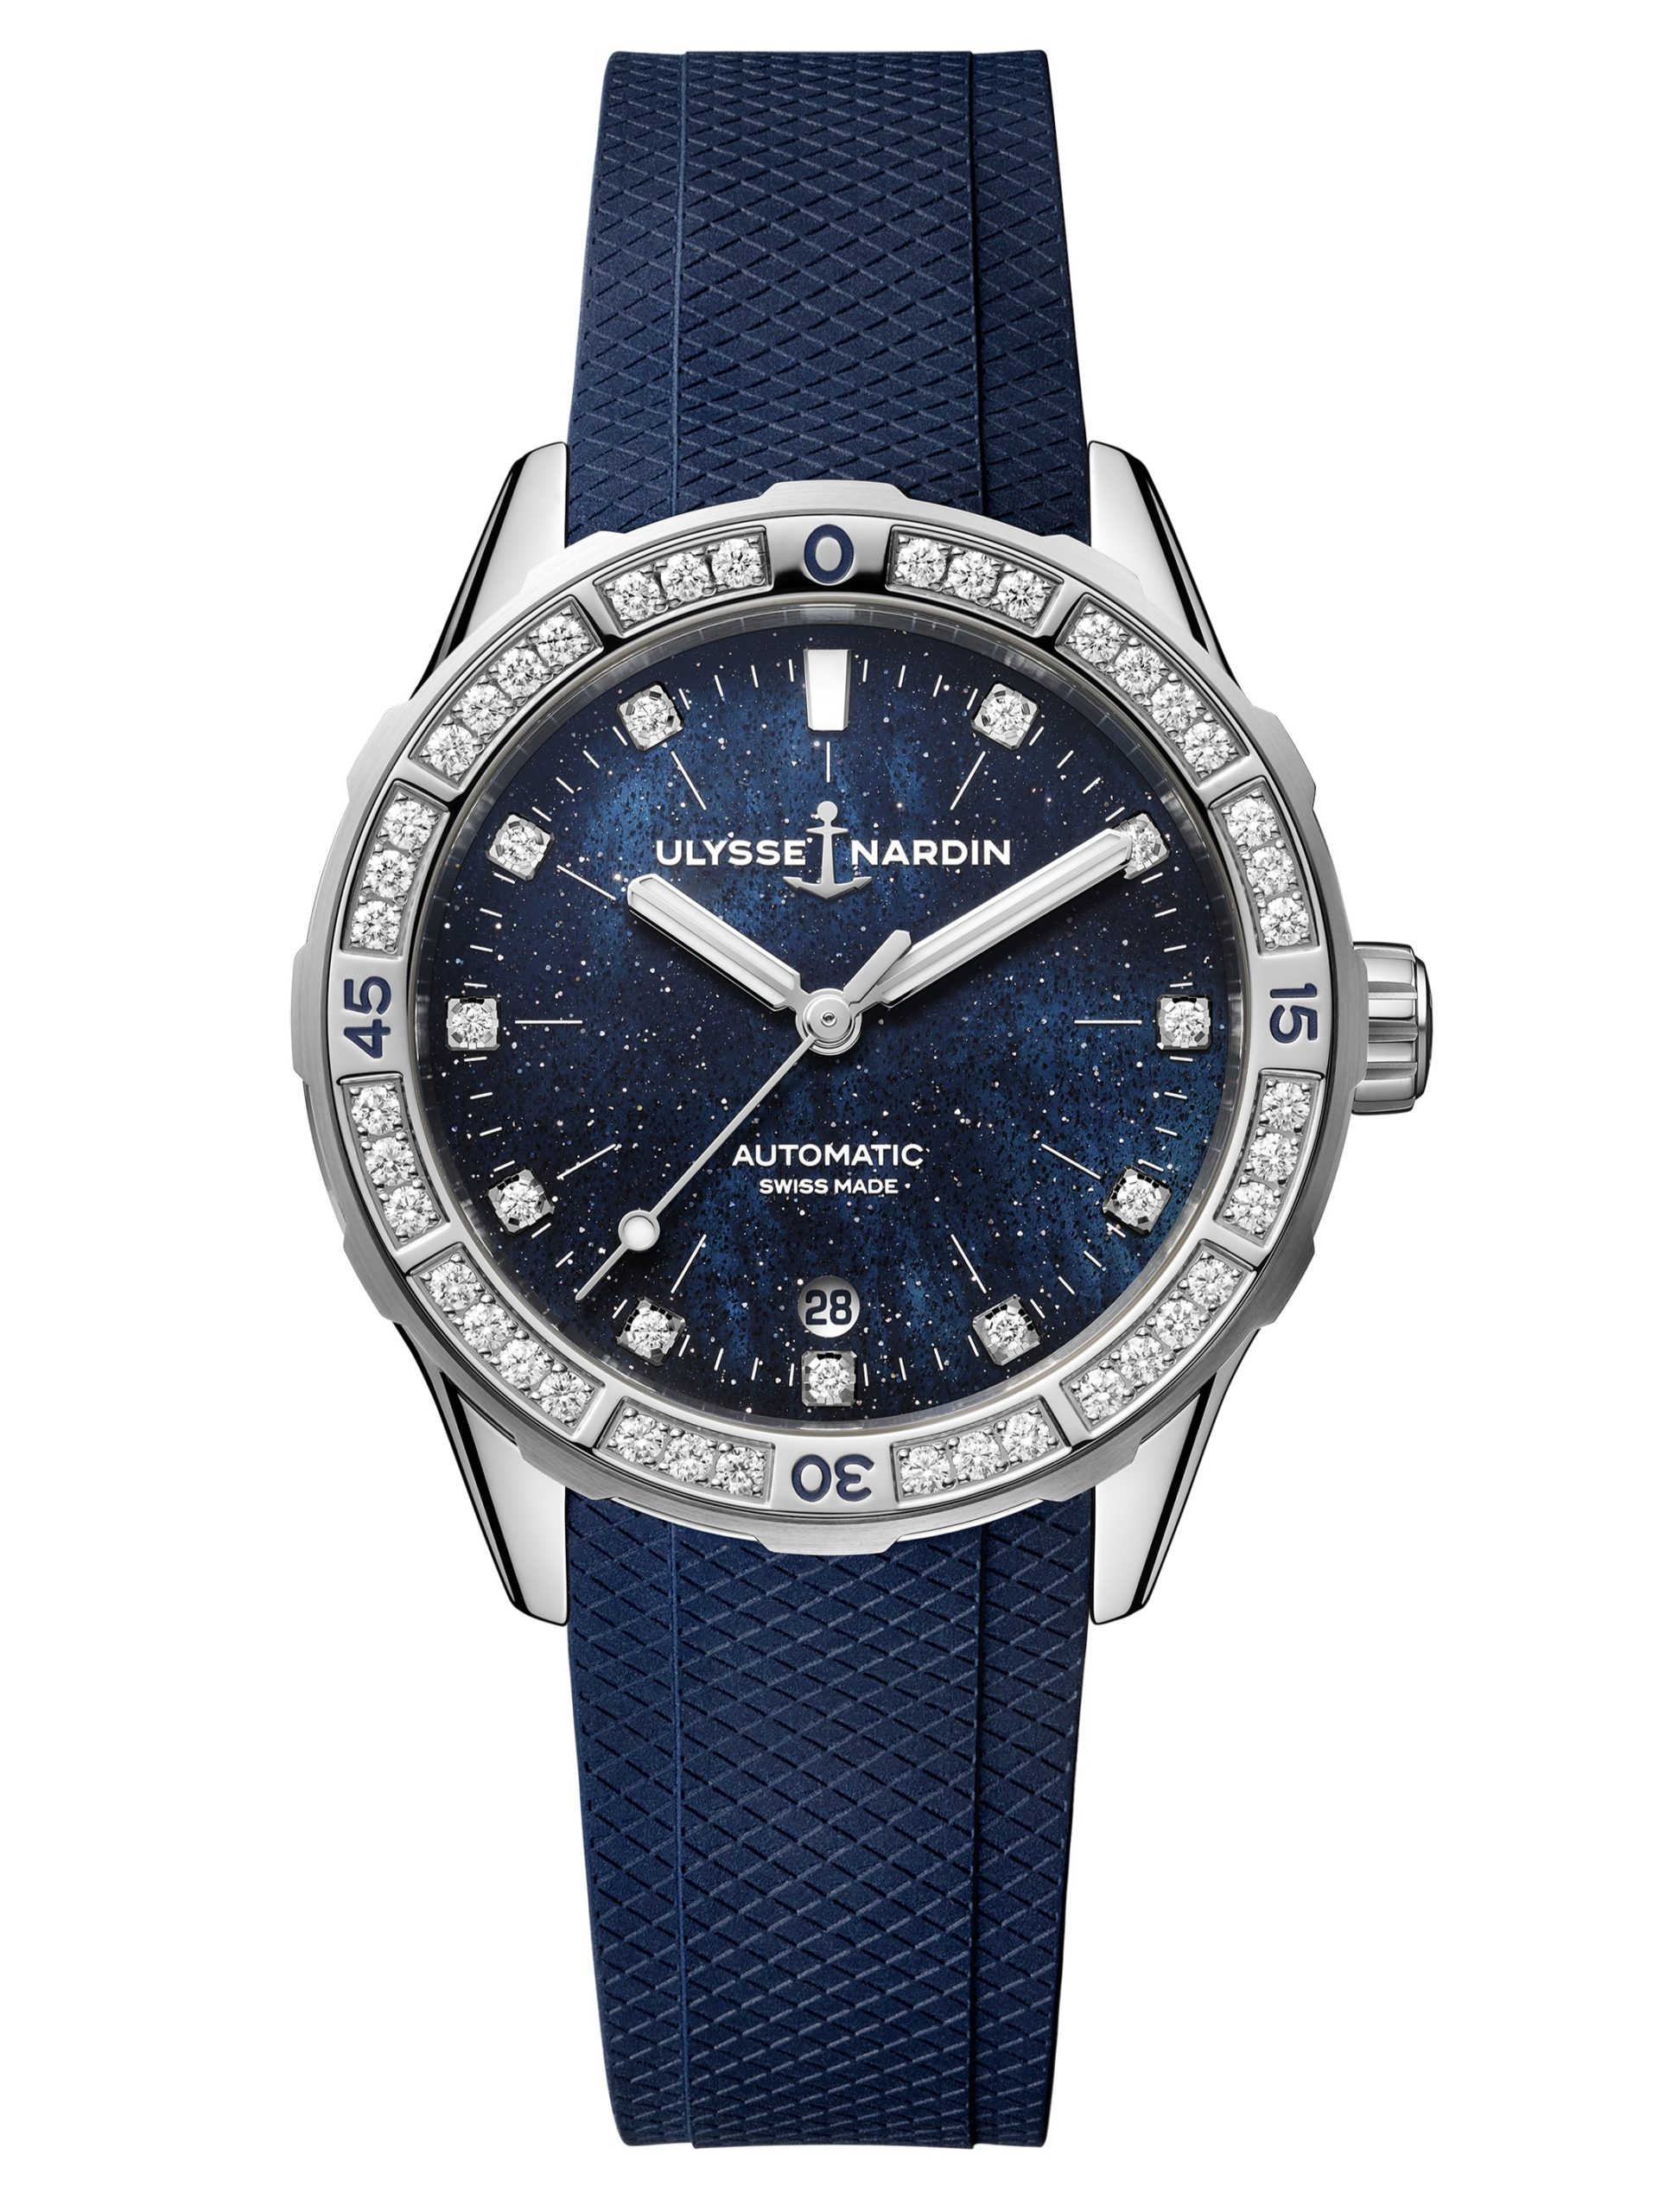 Ulysse Nardin | Diver | Exclusive Retailer | The Hour Glass Official